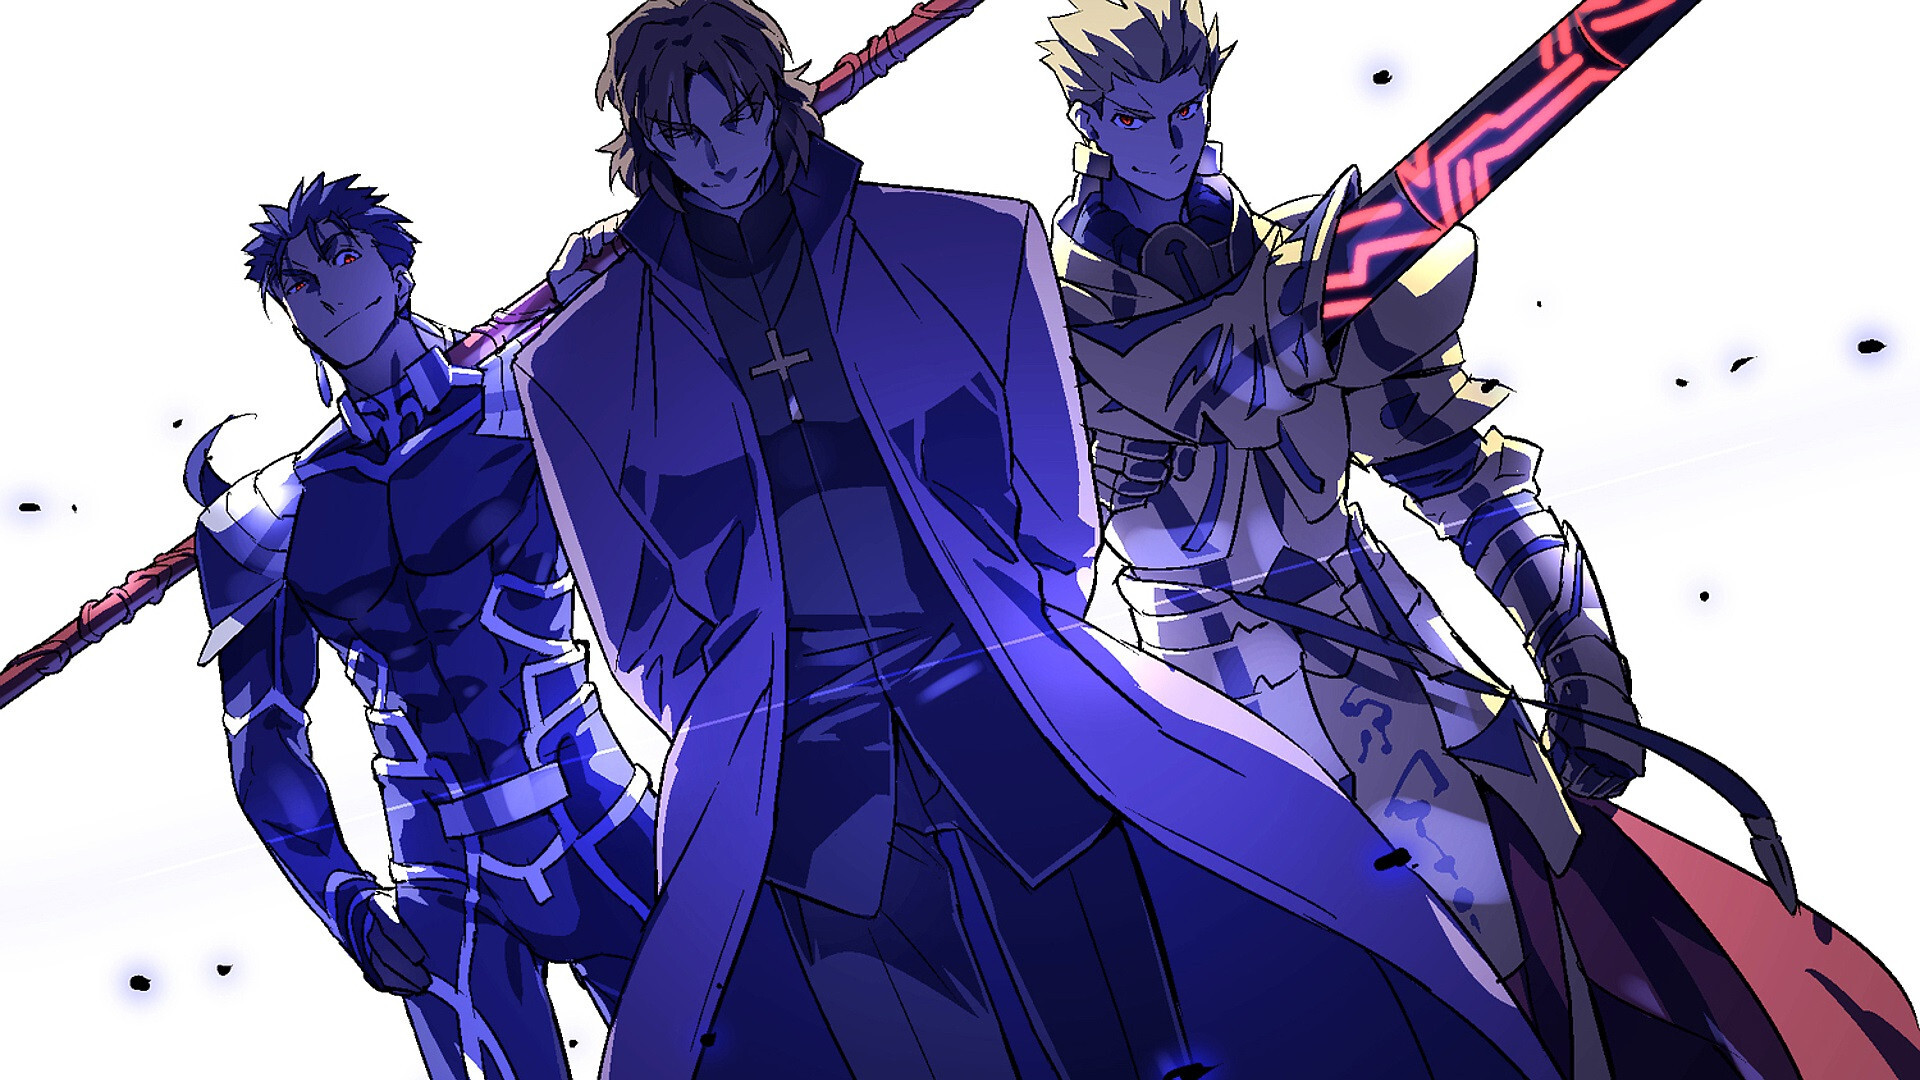 Gilgamesh (Fate/Zero): Kotomine Kirei, Fate/stay night, Fate media franchise, consisting of a number of adaptations. 1920x1080 Full HD Wallpaper.